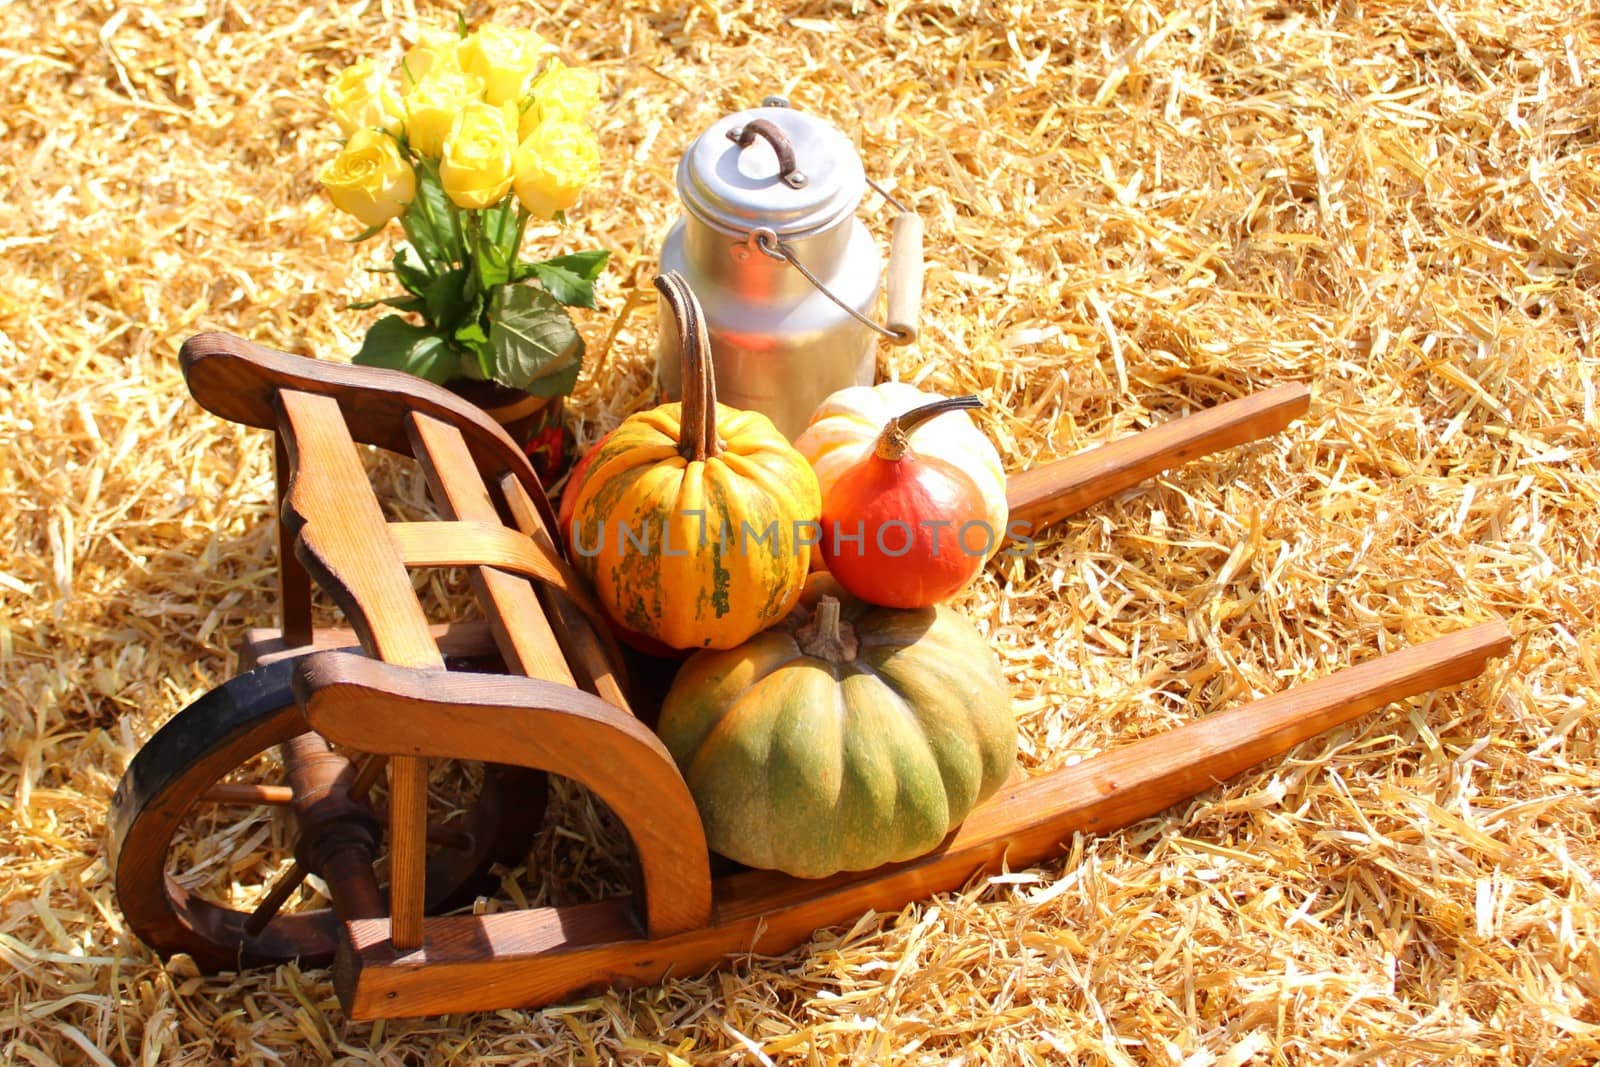 The picture shows a beautiful pumpkin decoration